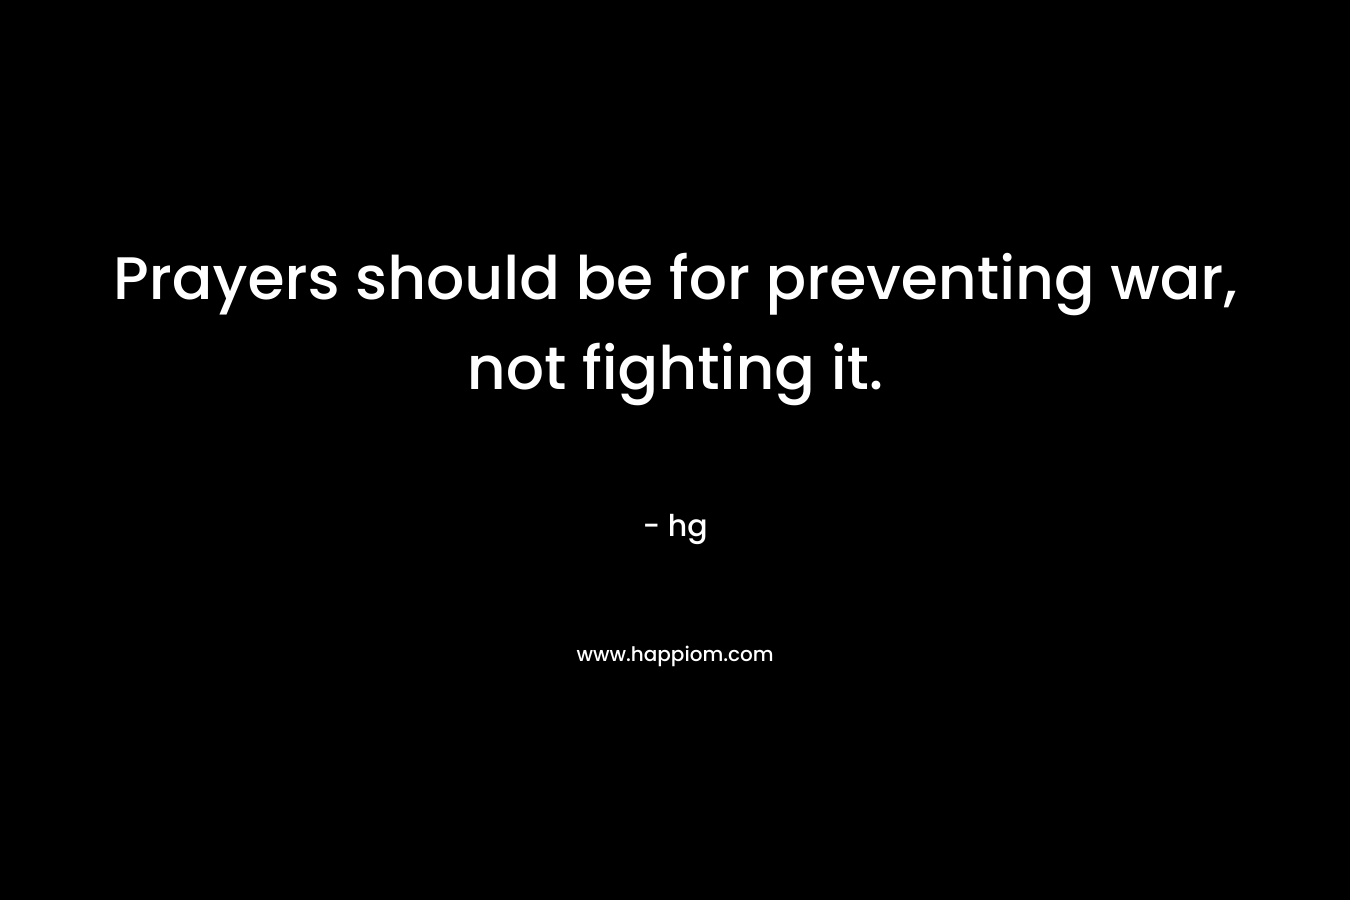 Prayers should be for preventing war, not fighting it. – hg